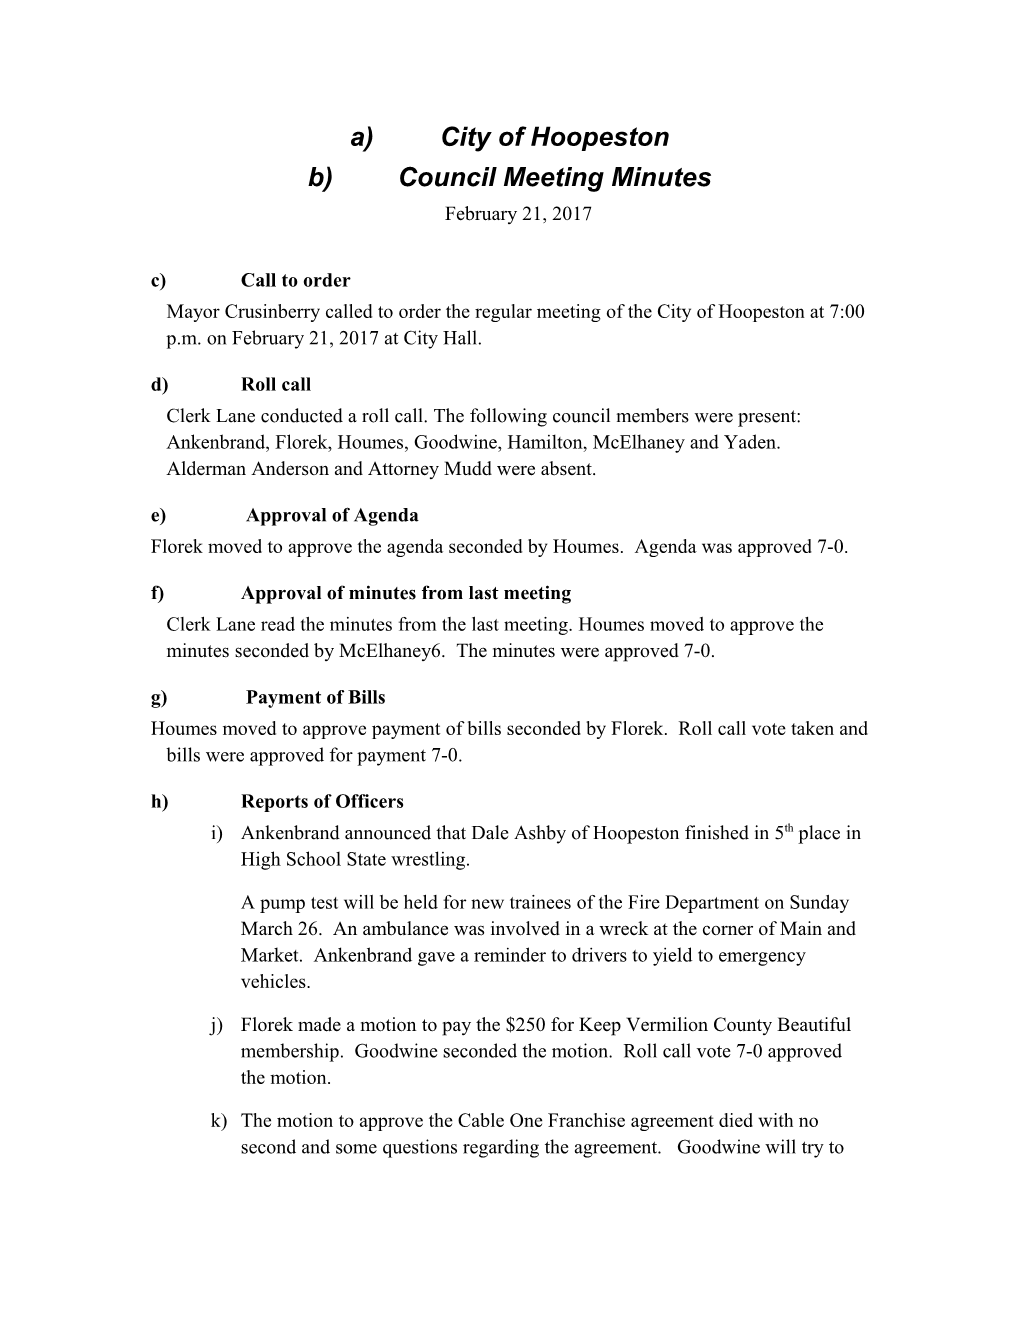 Formal Meeting Minutes s4